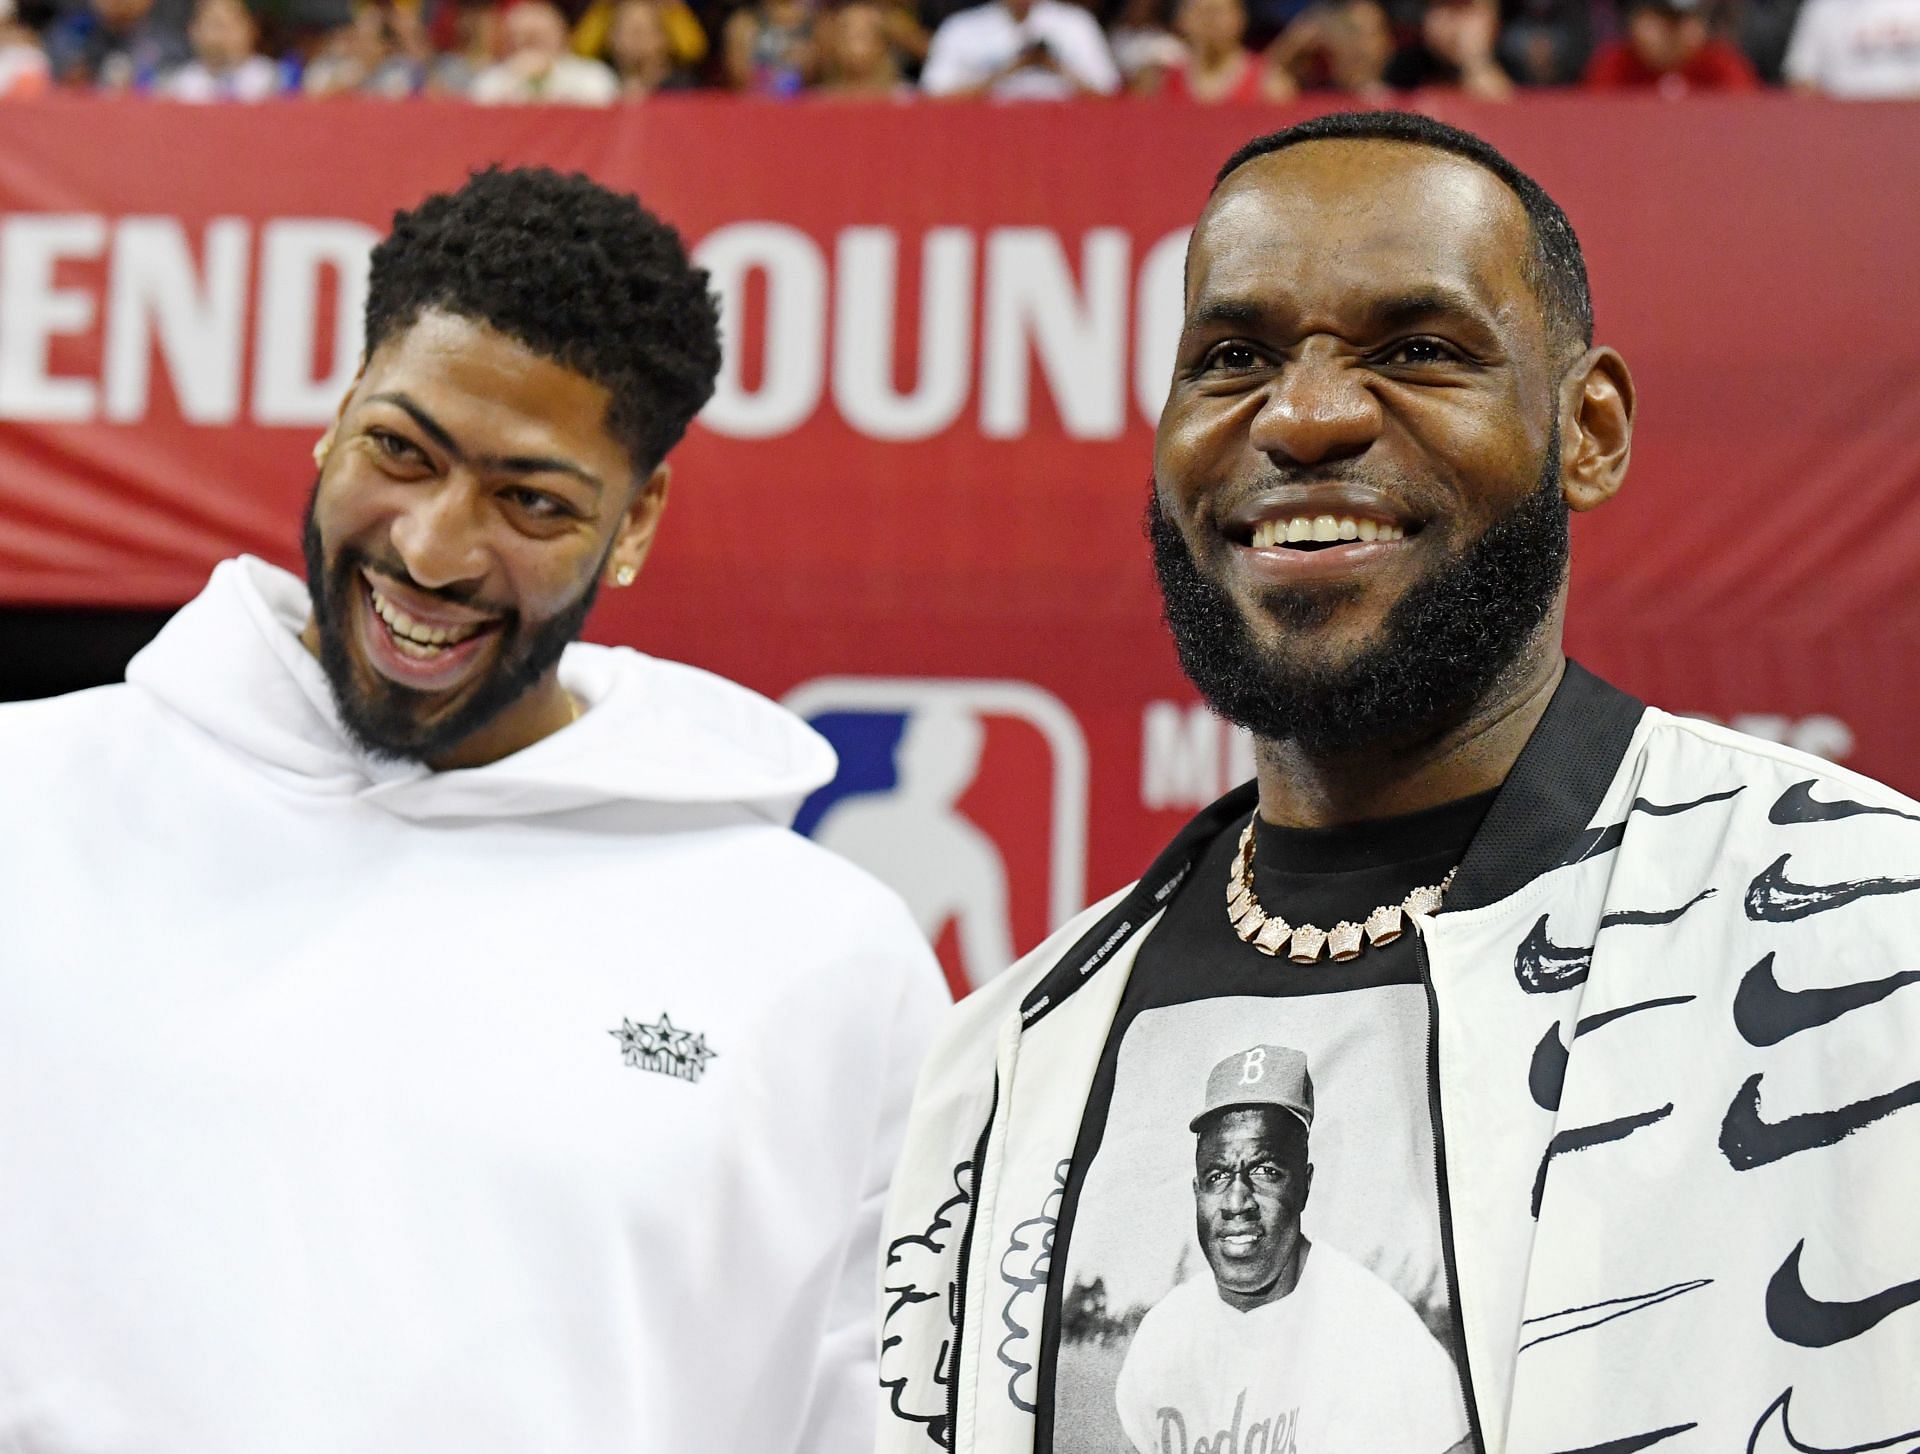 Anthony Davis (left) and LeBron James of the LA Lakers